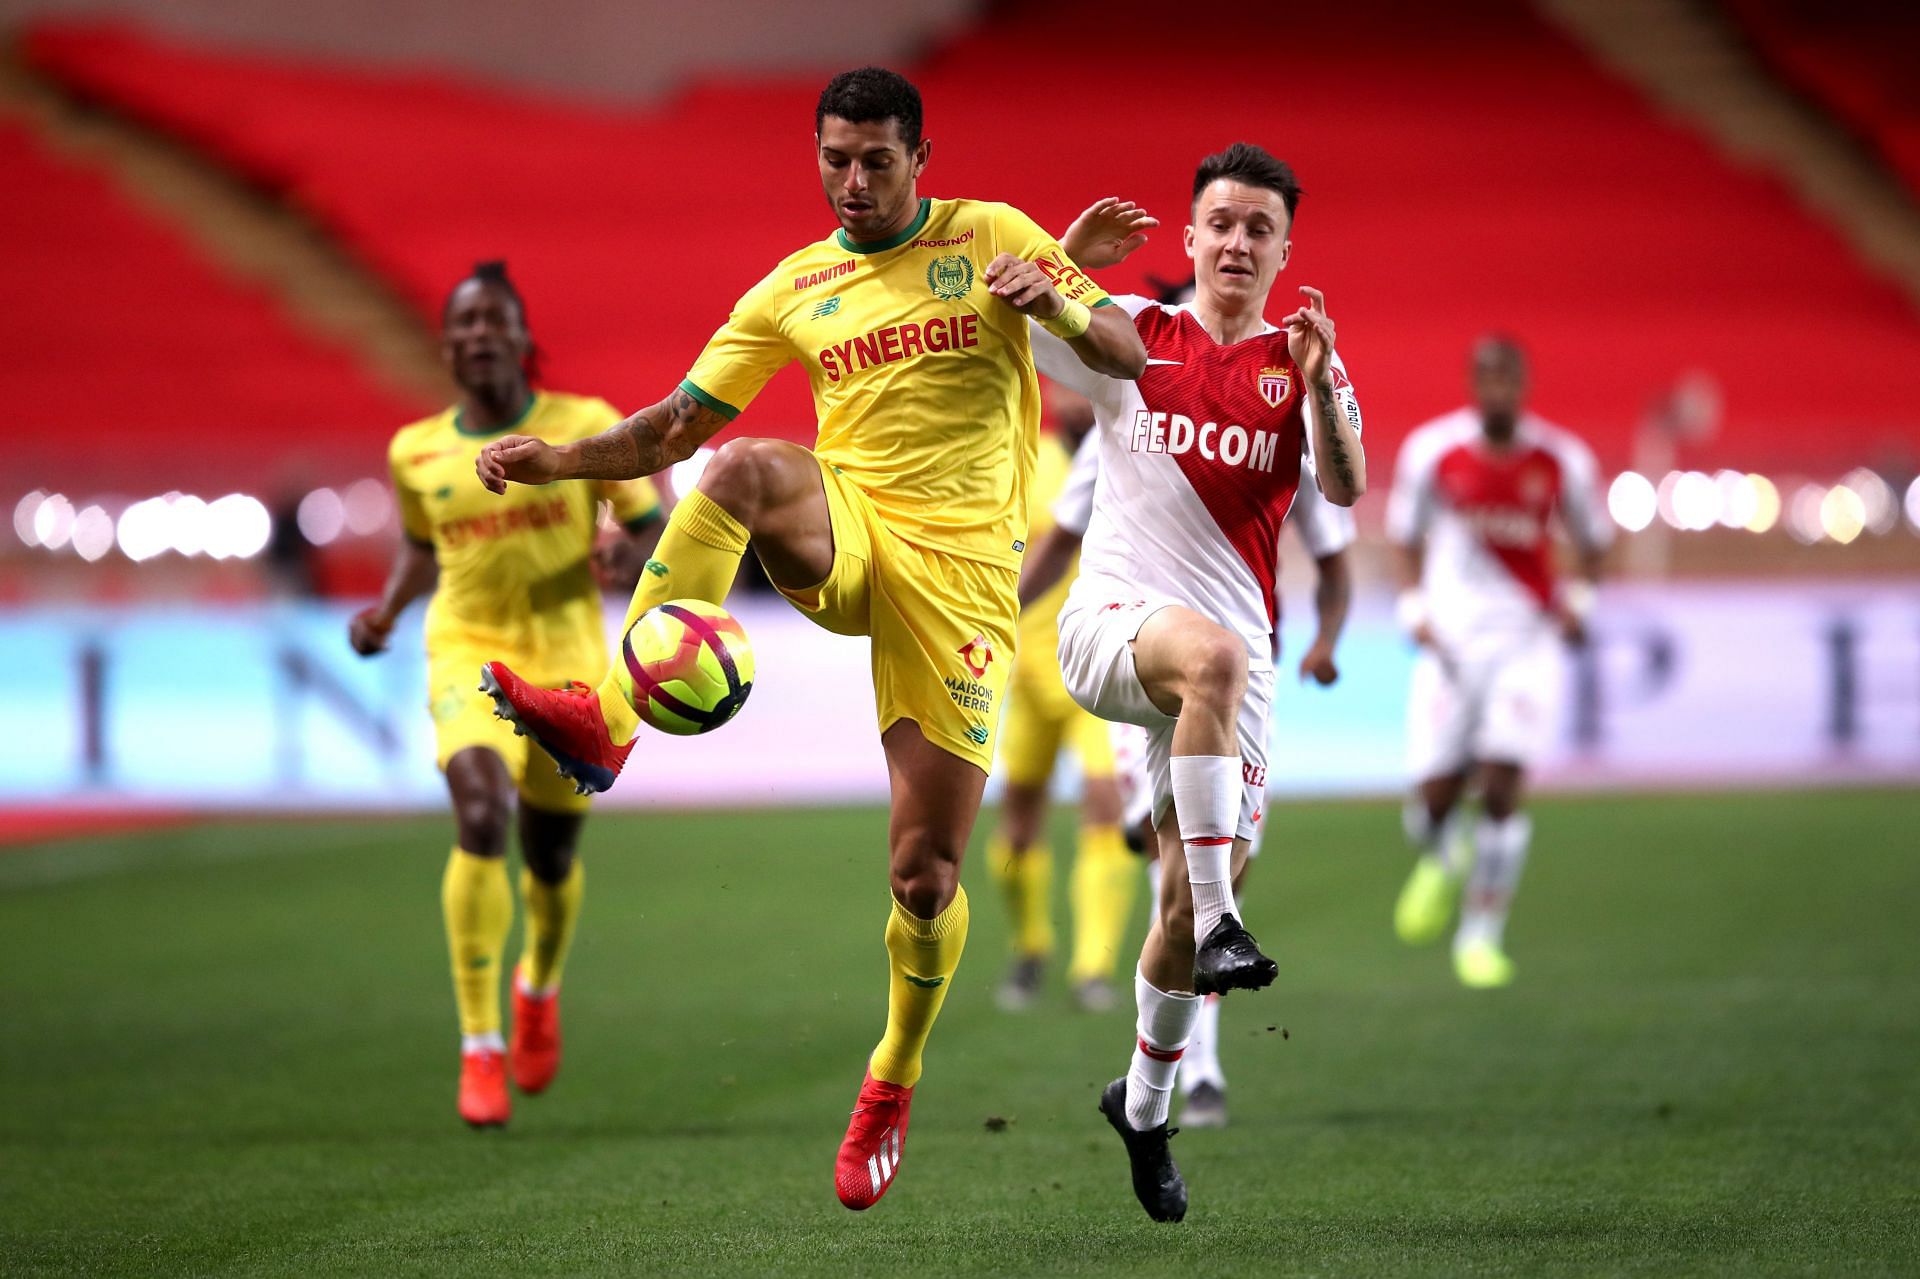 Nantes play host to Lens on Friday